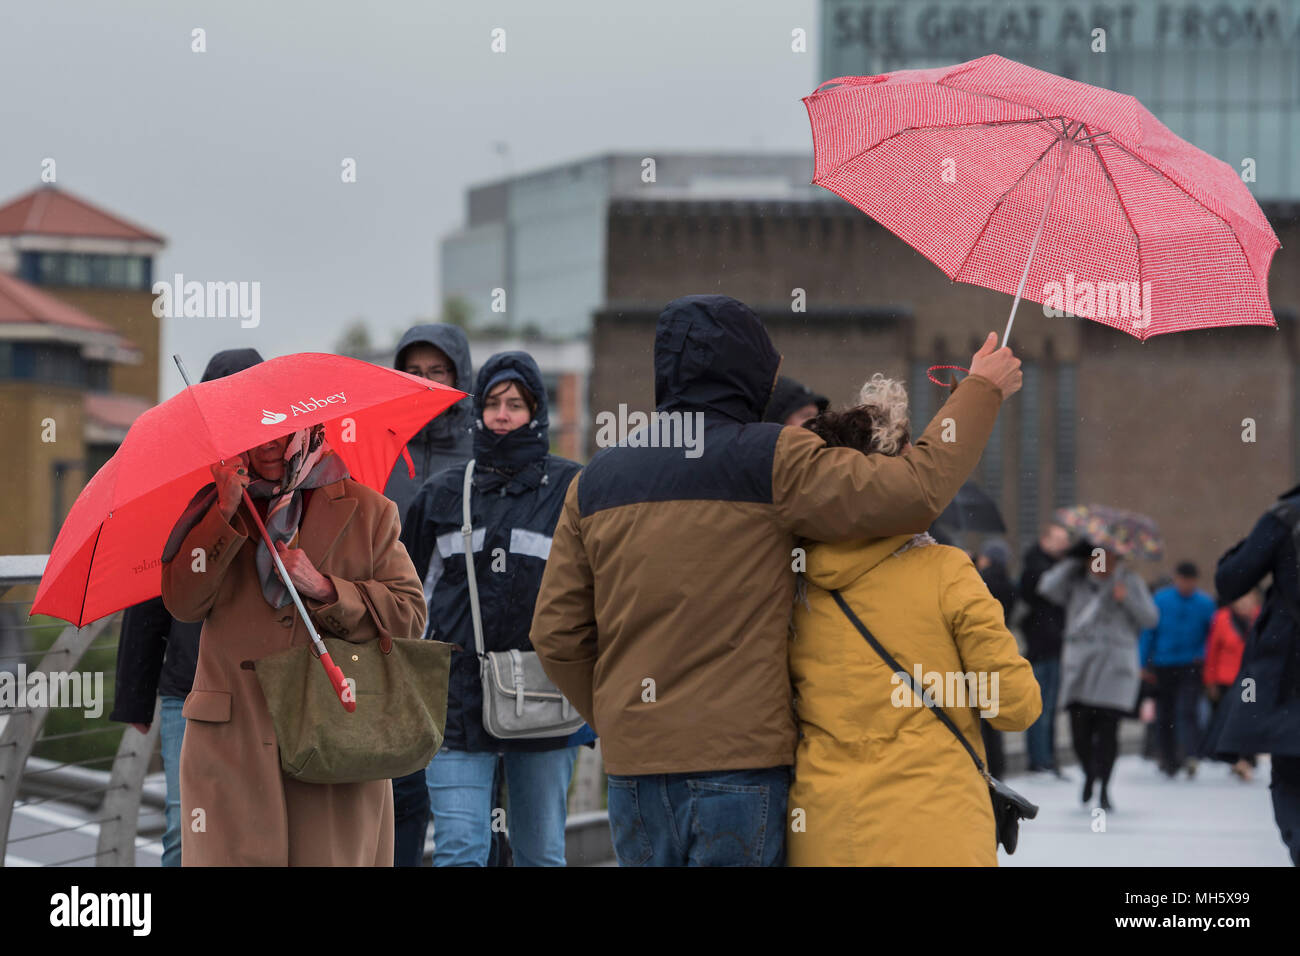 London, UK. 30th April 2018. People struggle with umbrellas as they cross the Millenniium Bridge in the wind and rain. Credit: Guy Bell/Alamy Live News Stock Photo